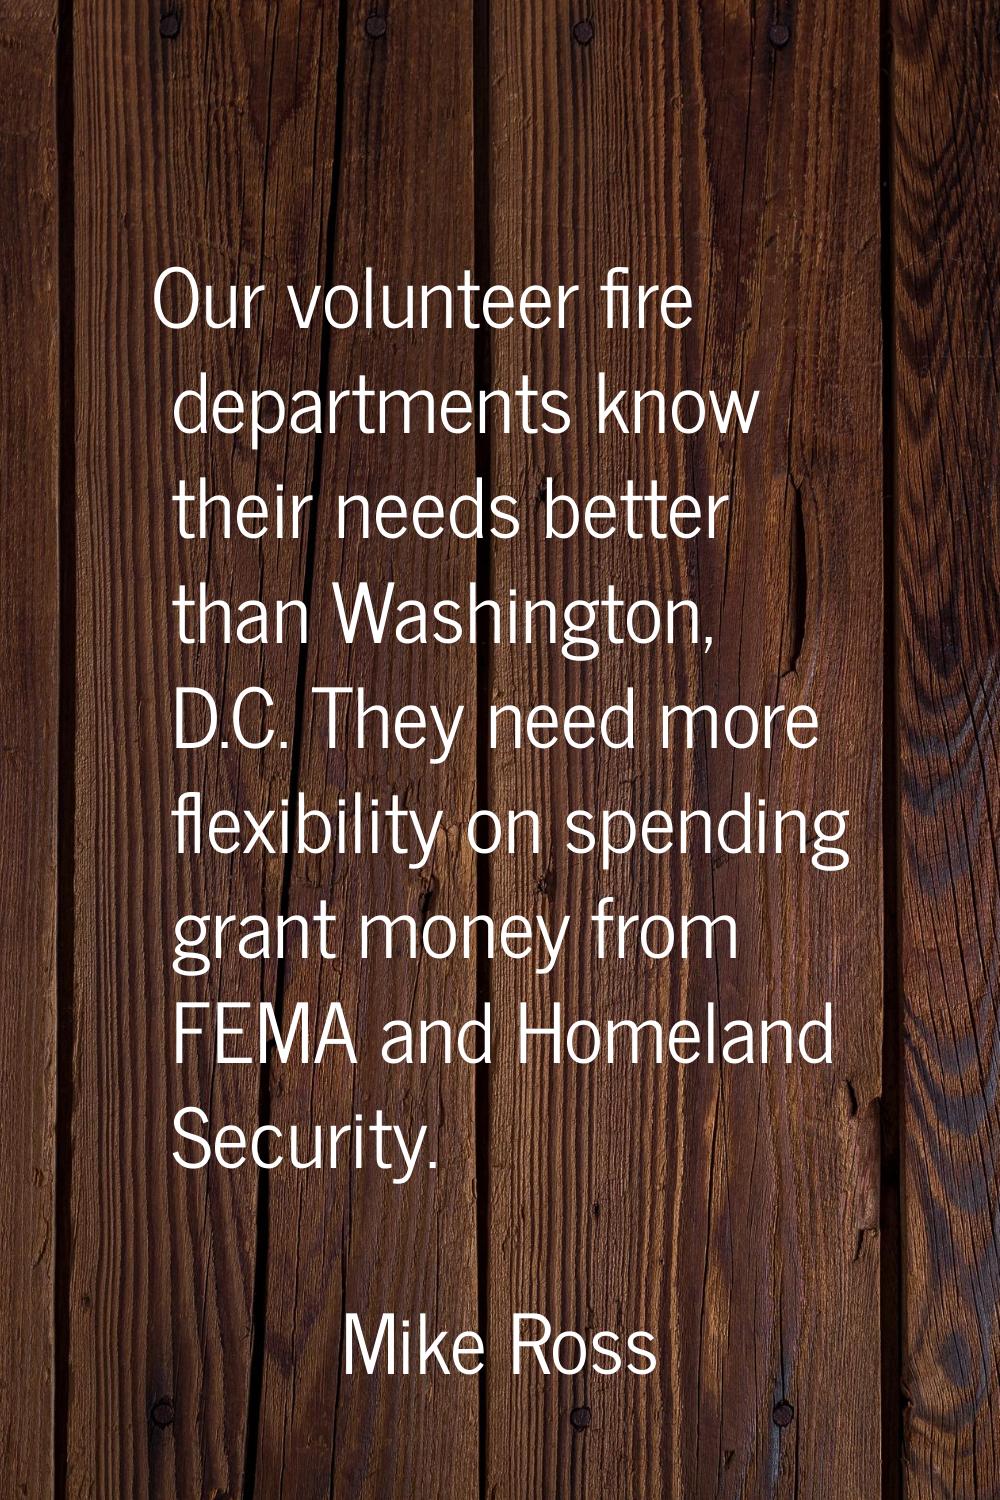 Our volunteer fire departments know their needs better than Washington, D.C. They need more flexibi